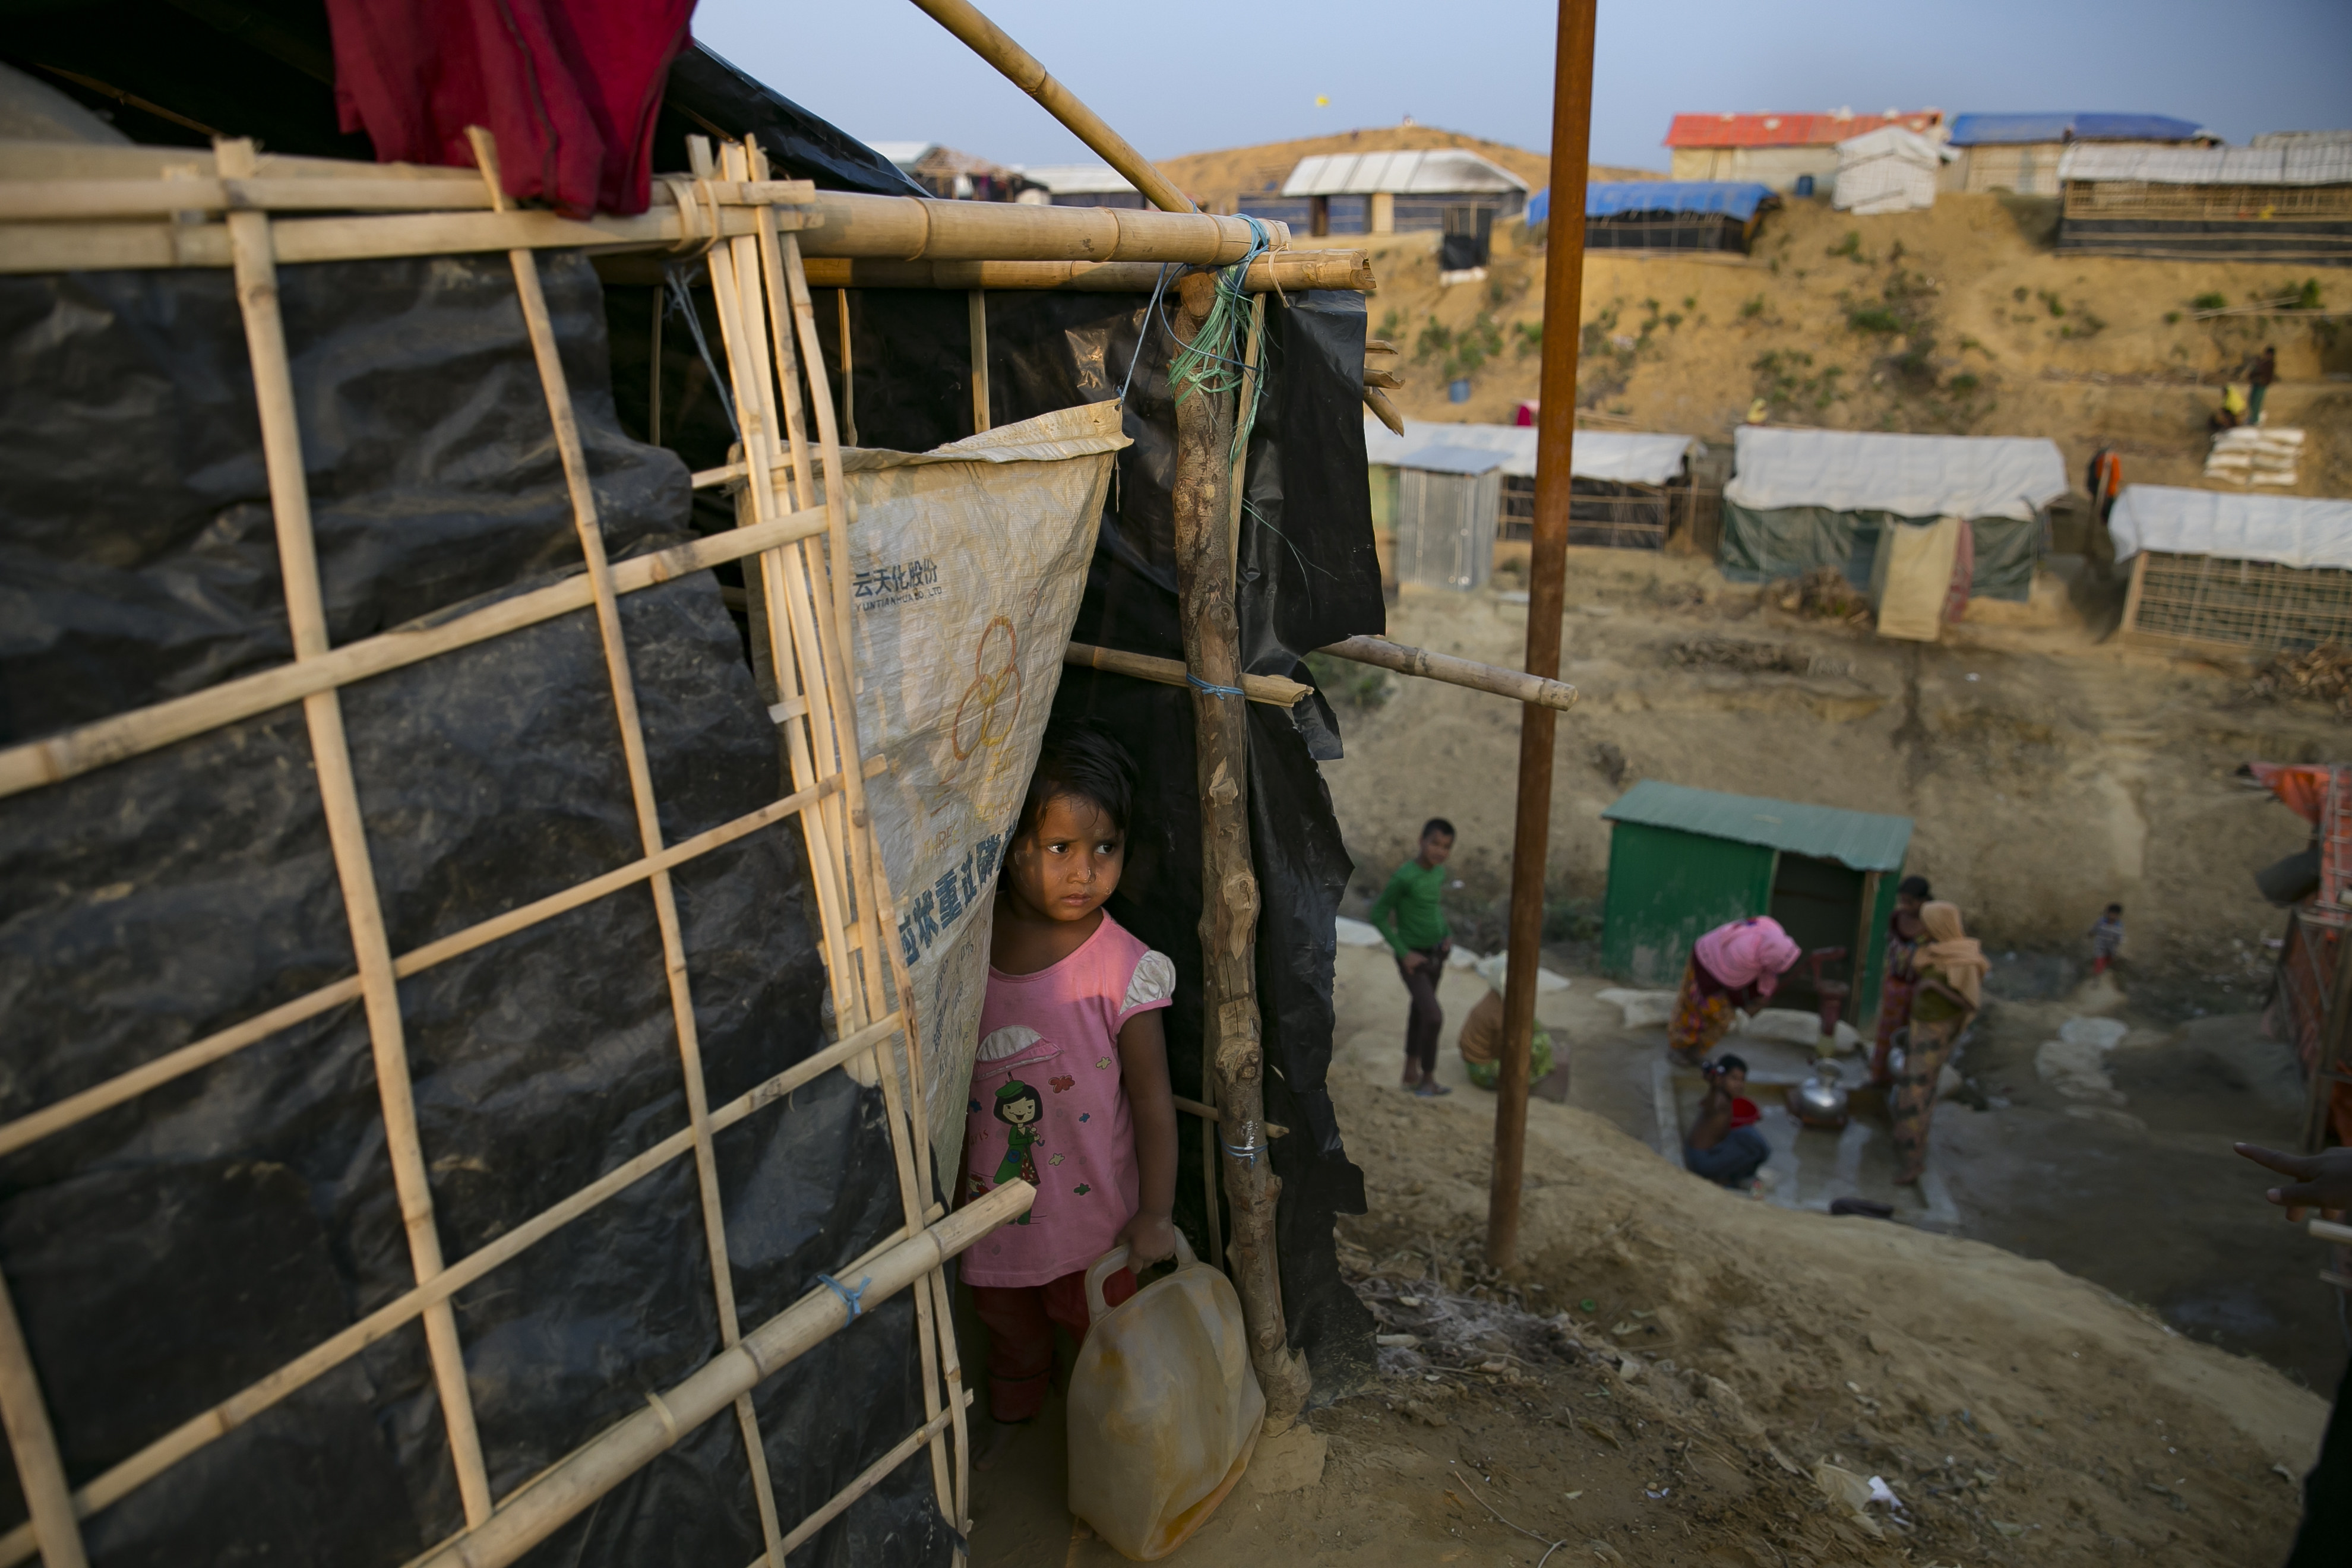 A girl looks out of her tent in the Balukhali refugee camp in Cox's Bazar, Bangladesh on Jan. 17, 2018. U.N. fact finders have pointed to the role that hate speech on social media has played in fueling anti-Rohingya sentiment and violence in Myanmar. (Allison Joyce—Getty Images)